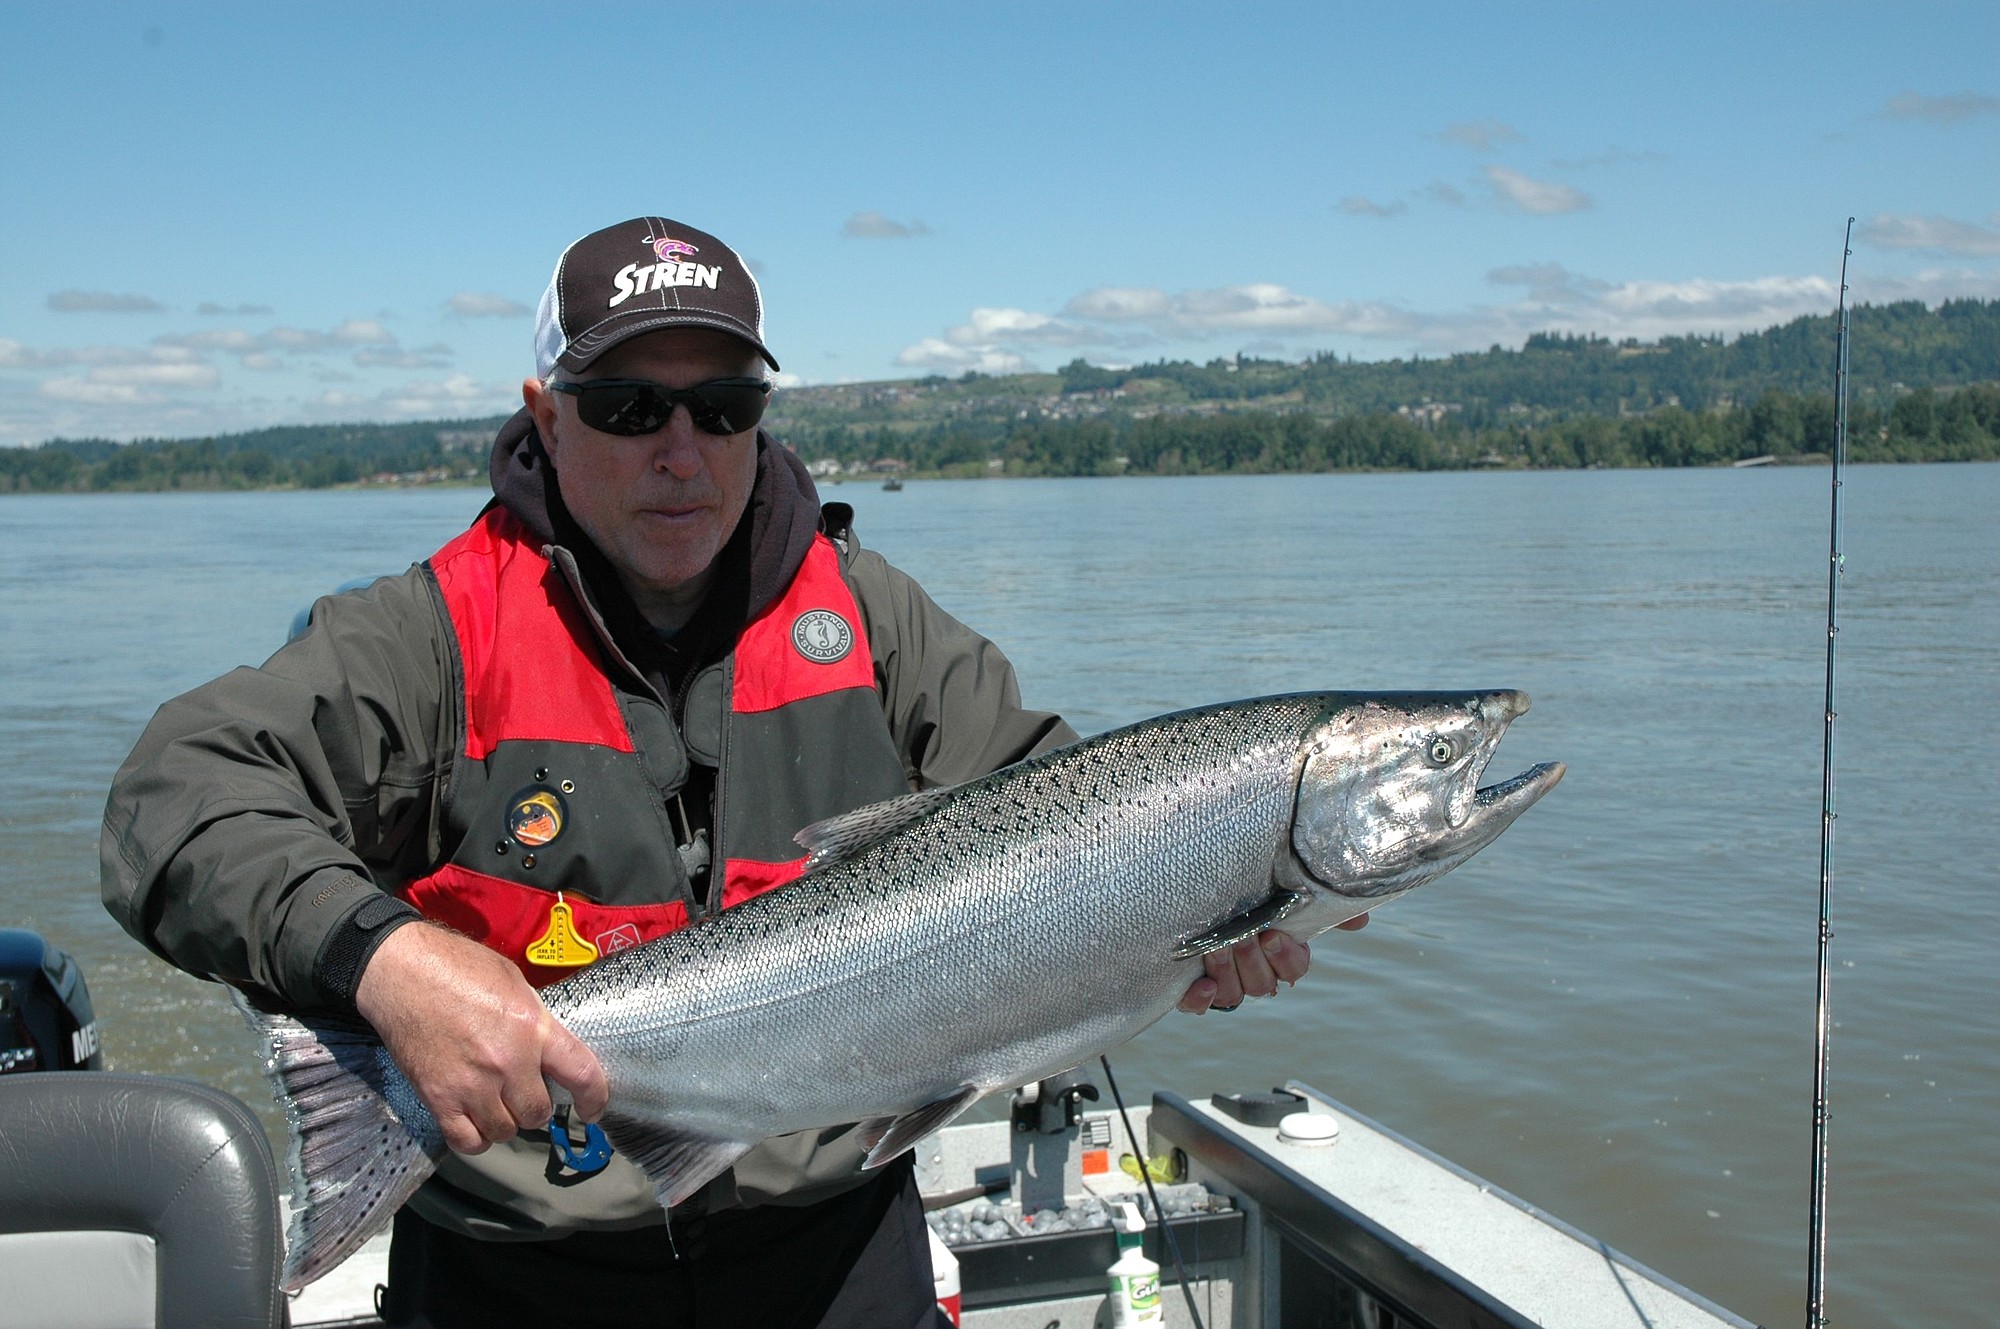 Colonel Thomas of Gresham landed this summer chinook near the mouth of the Sandy River on the third day of the season in 2010.